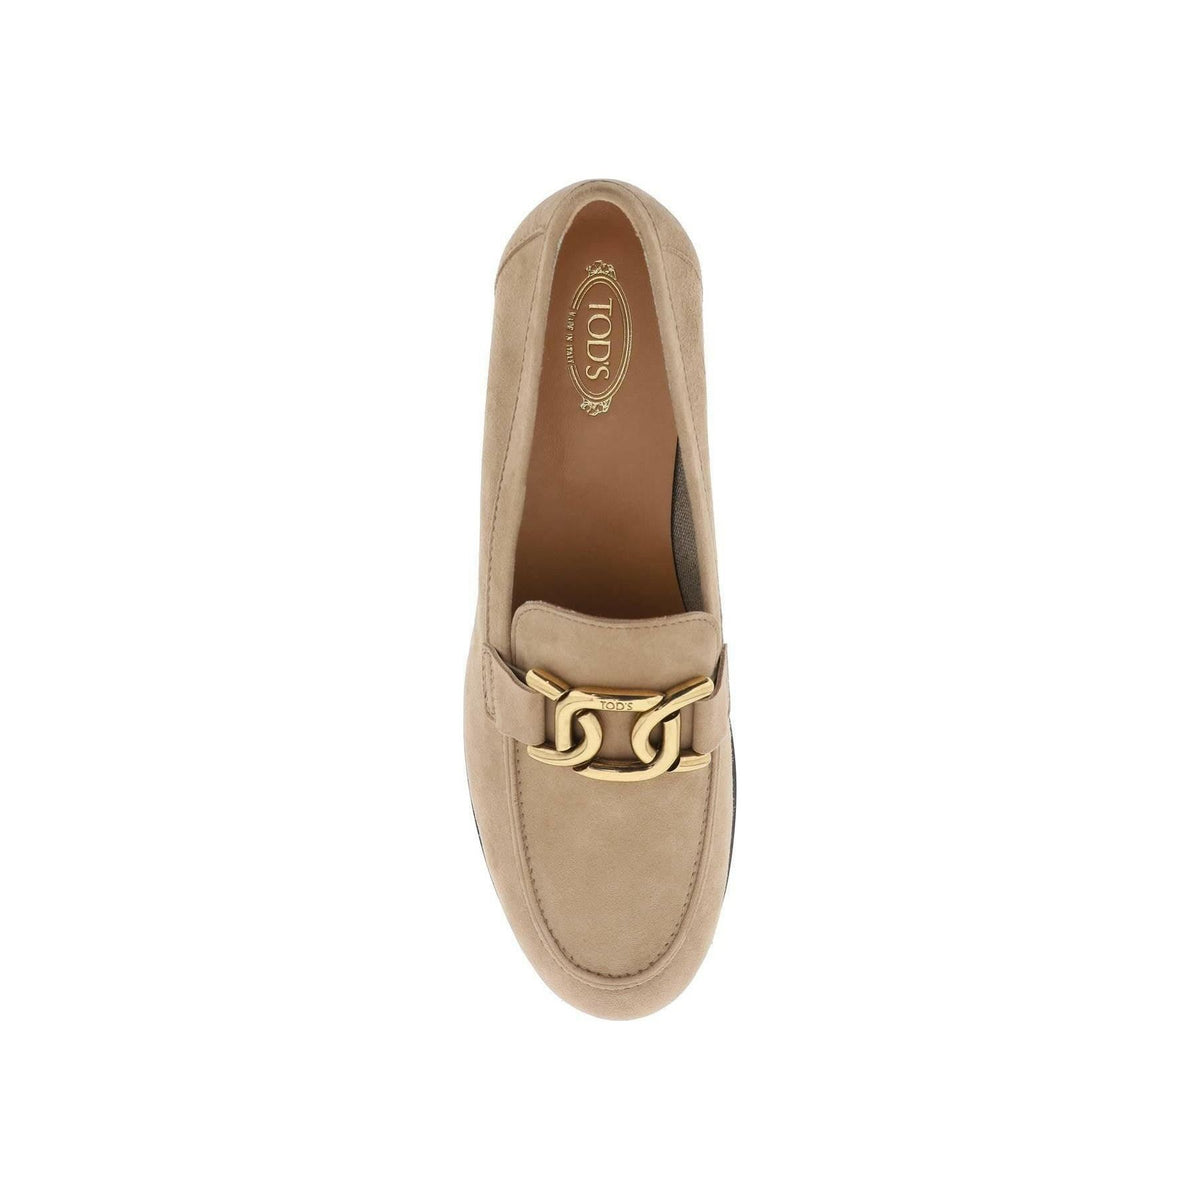 TOD'S - Kate Suede Loafers - JOHN JULIA